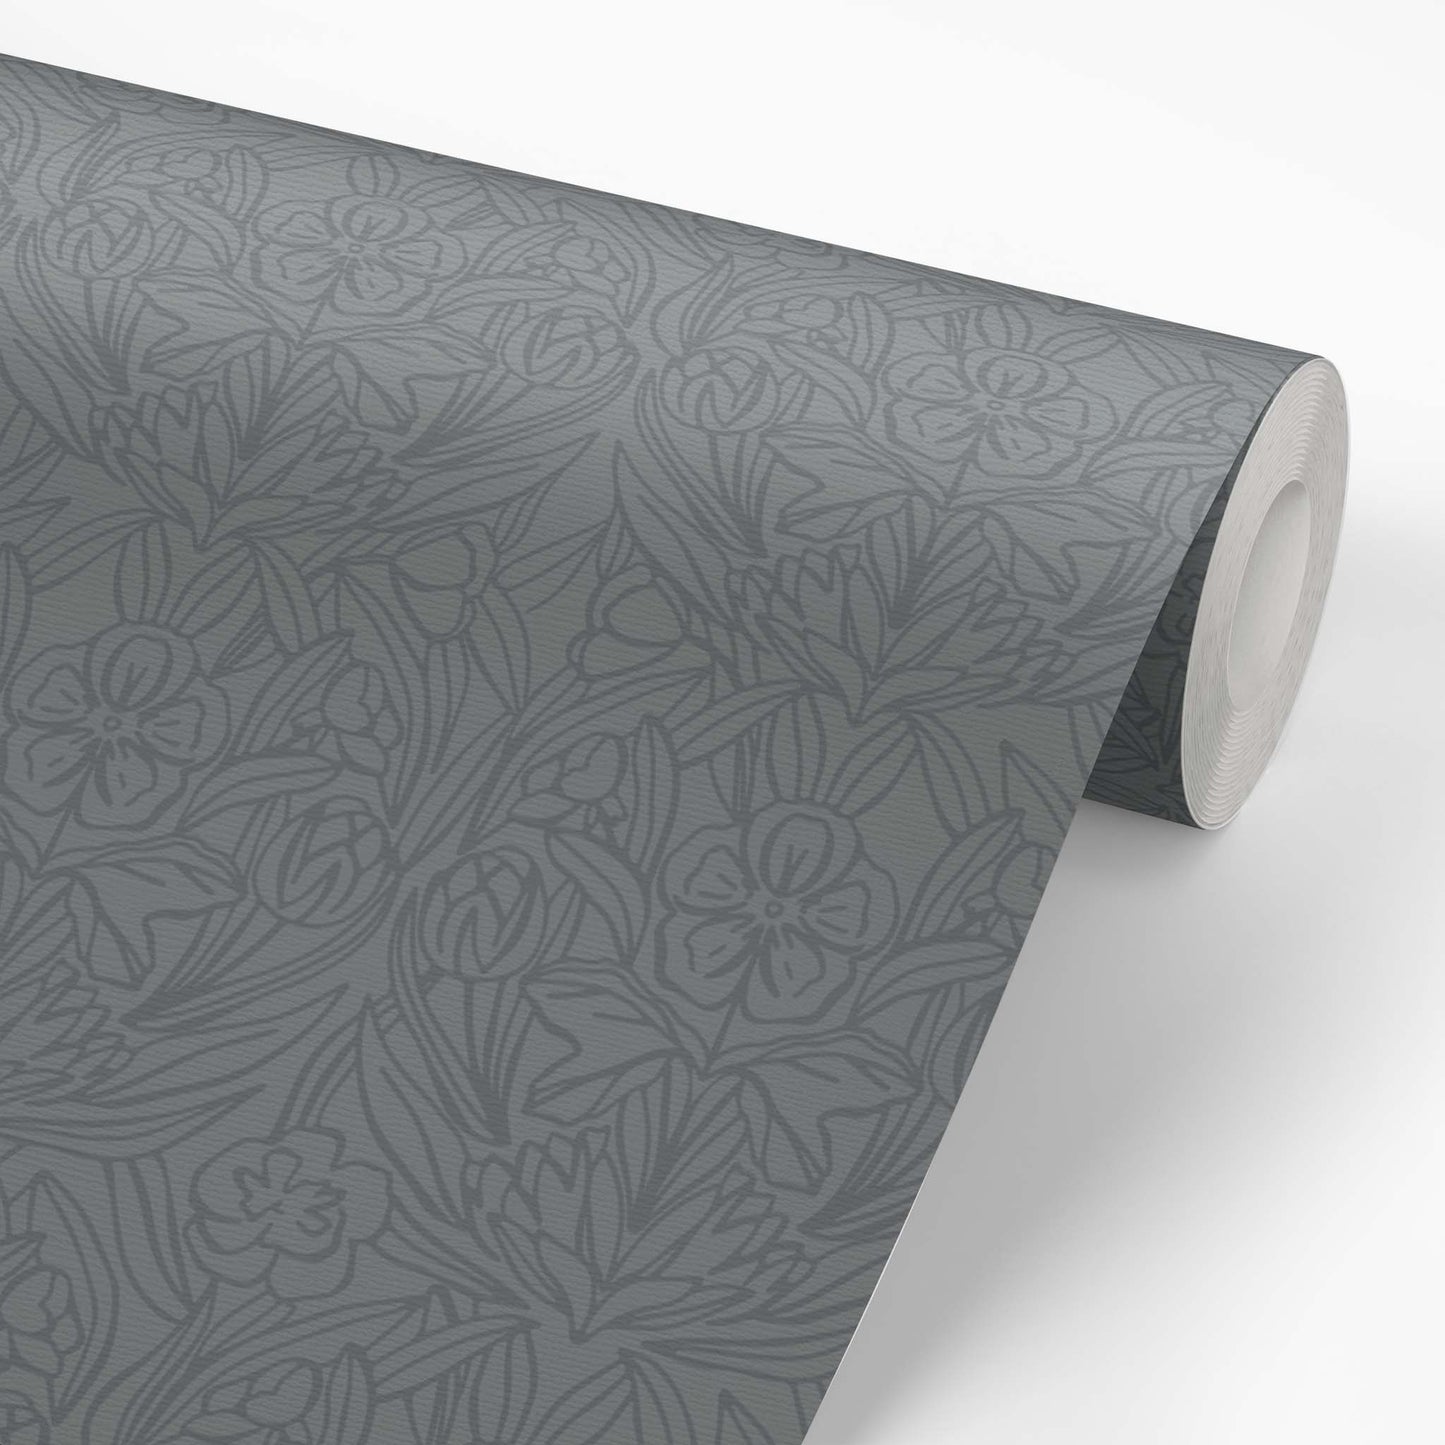 Featuring a subtle combination of florals, this blue wallpaper adds a touch of elegance shown on a wallpaper roll.